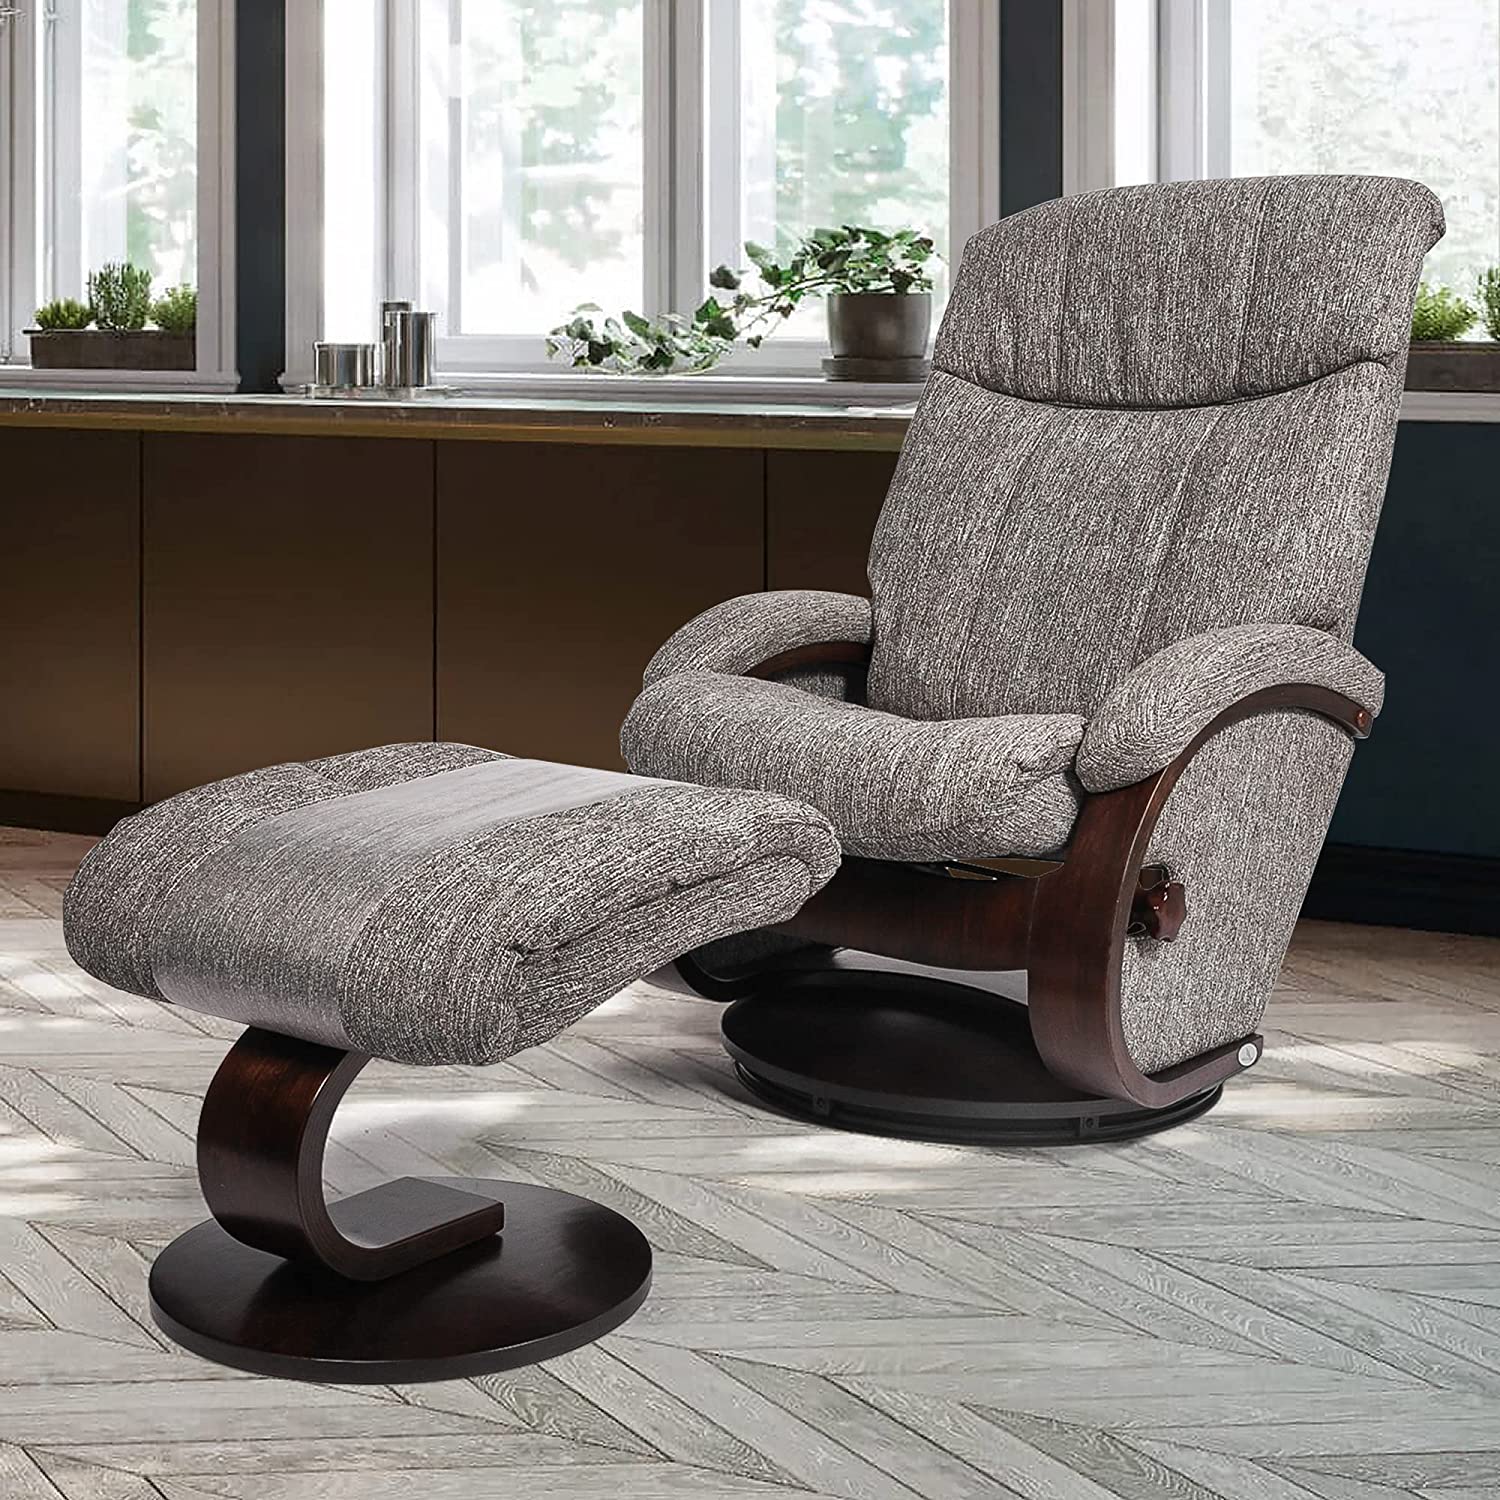 Modern Grey Swivel Recliner Chair with Ottoman Set for Ultimate Comfort and Style